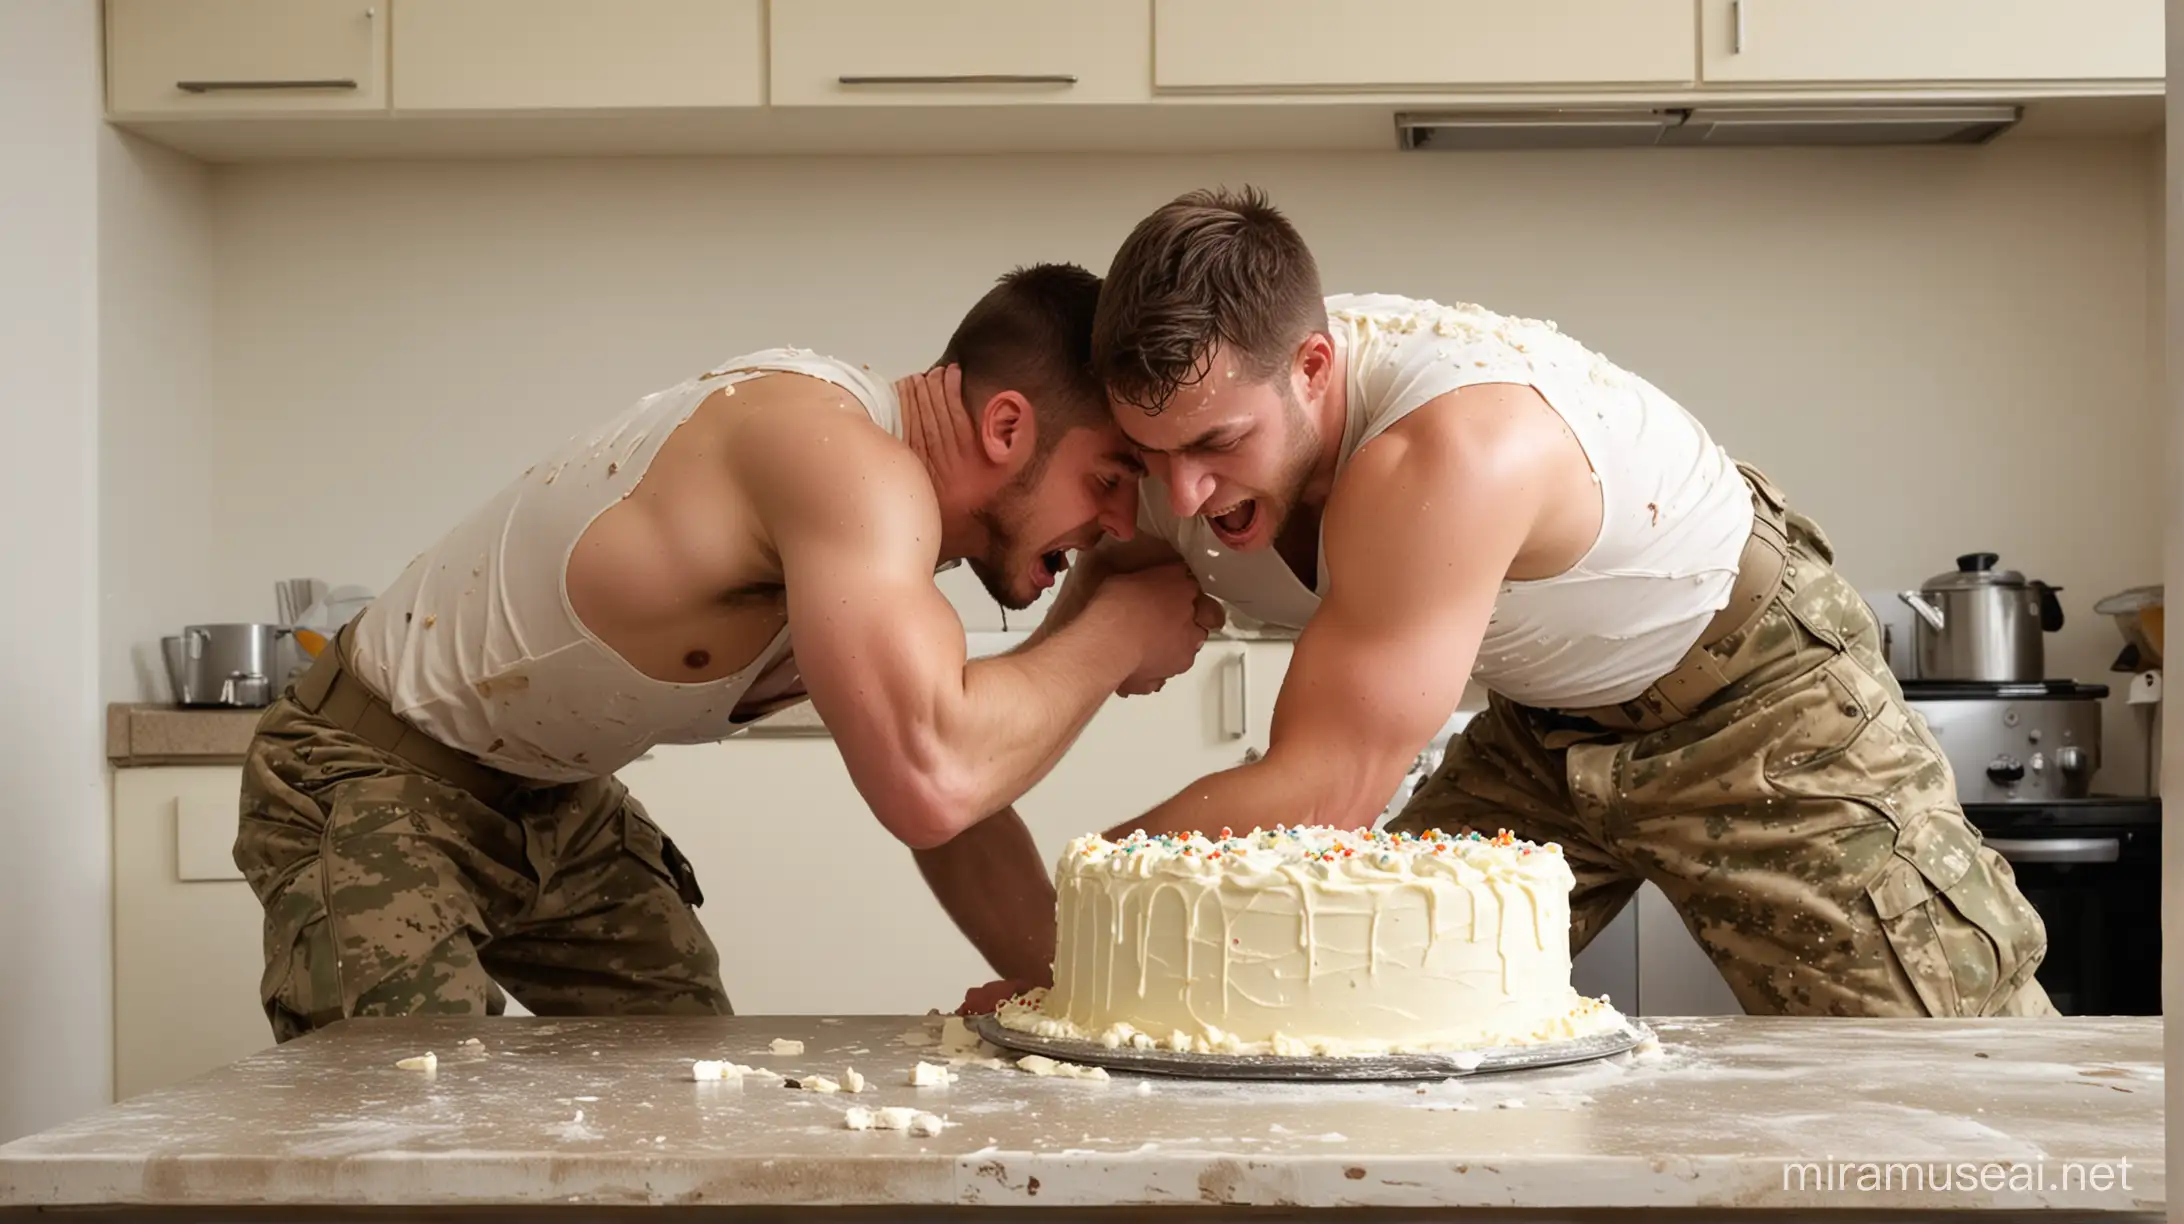 white men, two uniformed soldier wrestling and fighting, gay, cake fighting, body crushes the cake, the ass crushes the cake, in kitchen, impacts cake, hits cake, cake in ruin, face in cake, atractive face, wet dirty, uniform covered in cake and cream, fighting and wrestling, fist fight, pressing your face into the cake and cream, trampling the cake, back on the cake, back pocket, cake violence,